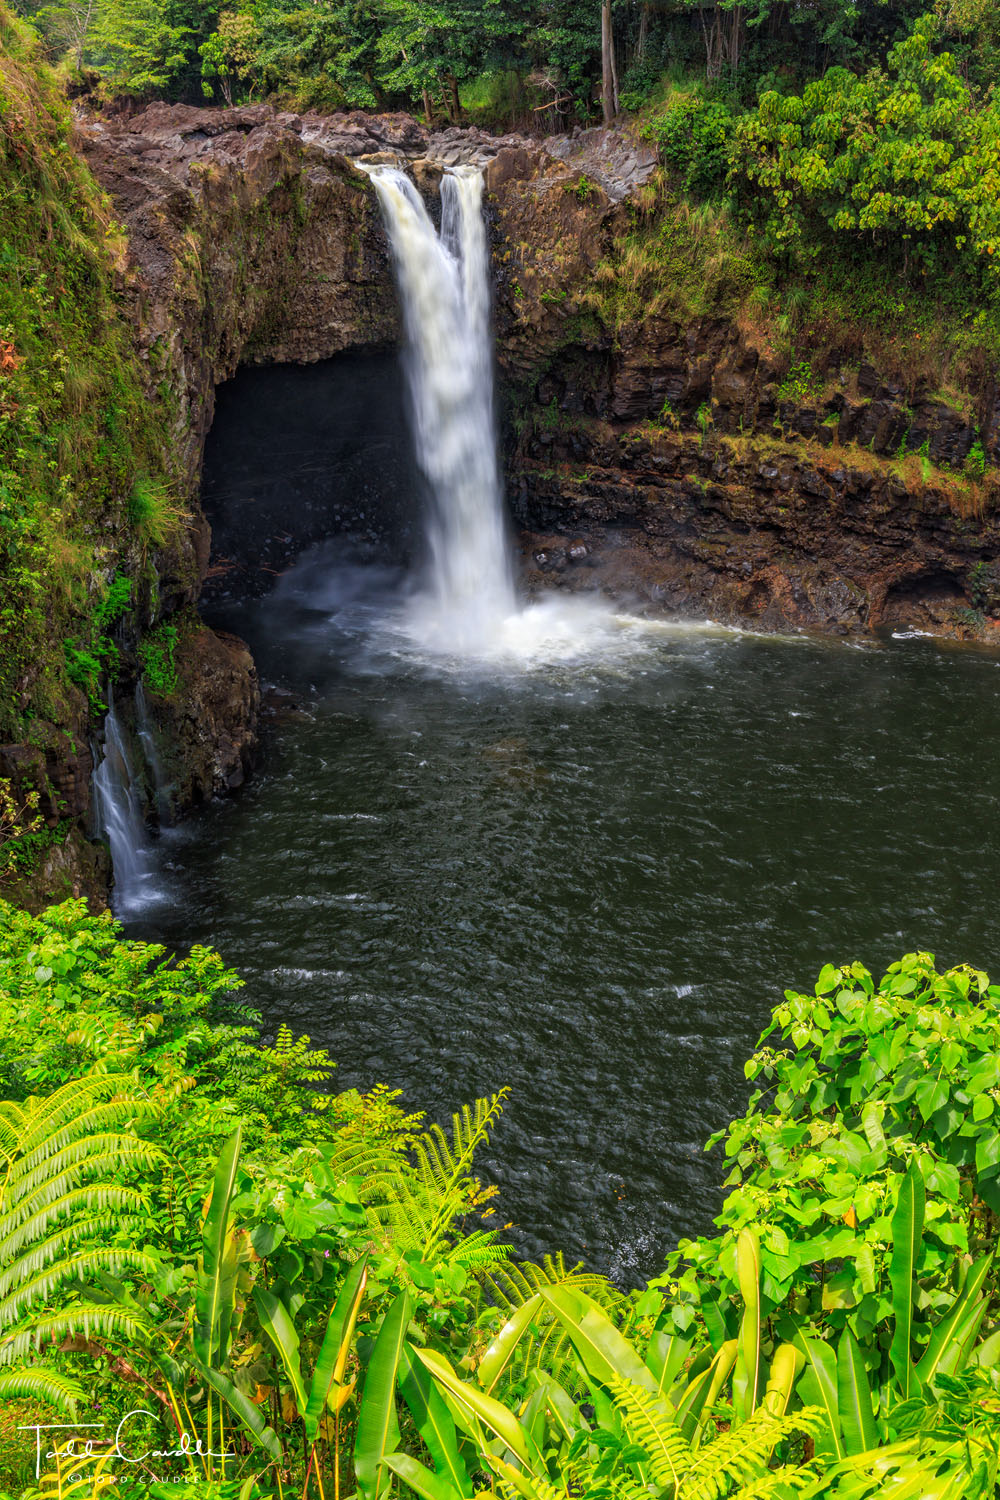 So named because rainbows often form in the spray at the base of the falls, Rainbow Falls is a beautiful oasis in Hilo. Nearby...